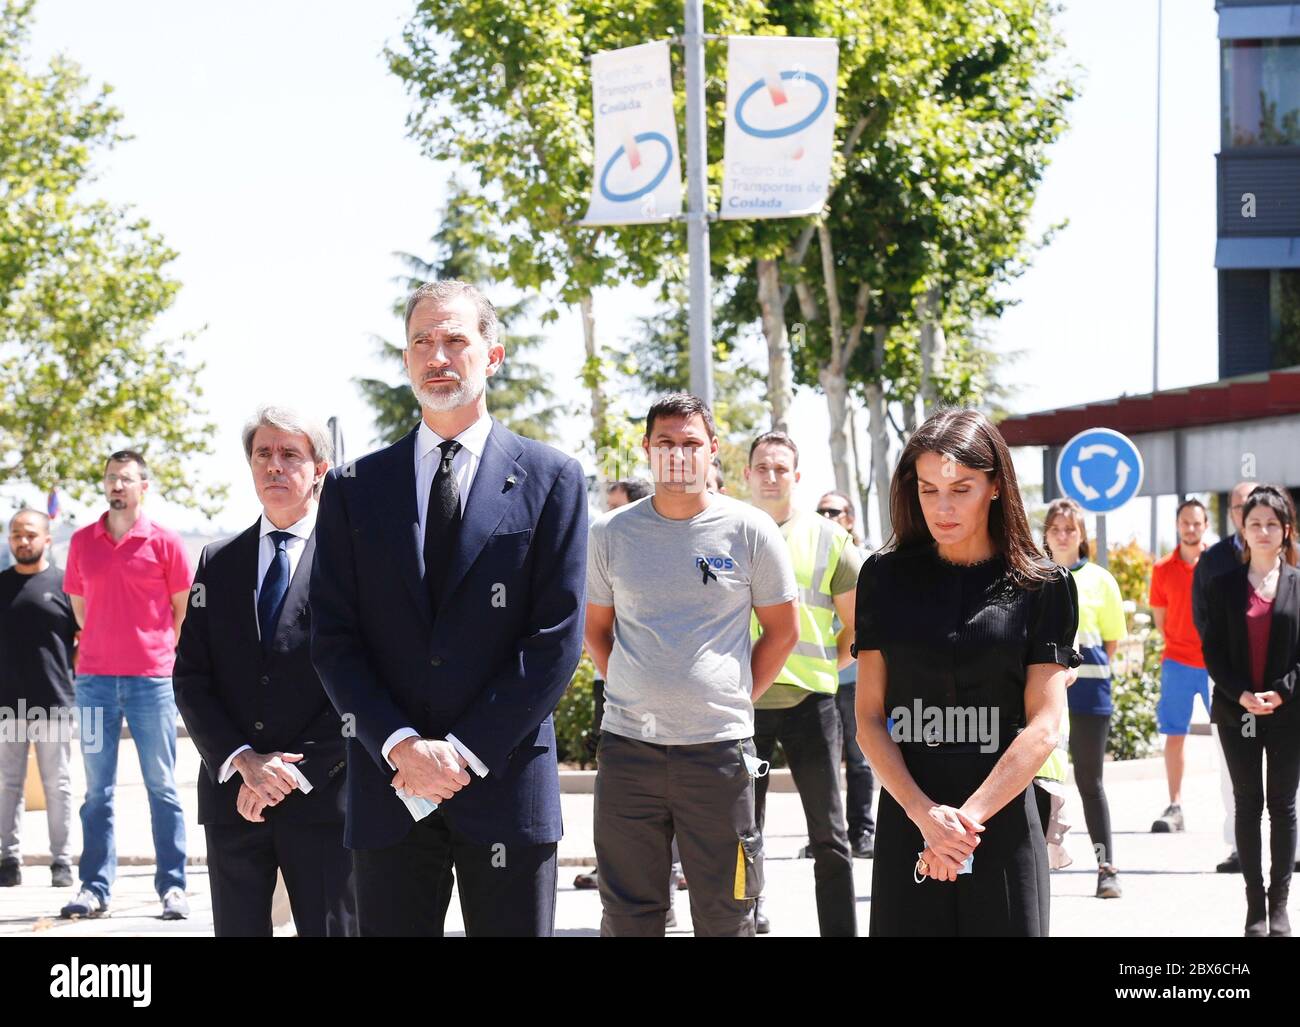 Coslada, Spain. 5th June, 2020. ***NO SPAIN*** King Felipe VI of Spain, Queen Letizia of Spain take a moment of silence for victims of COVID-19 as they visit the Coslada Transport Center on June 5, 2020 in Coslada, Spain. Credit: Jimmy Olsen/Media Punch/Alamy Live News Stock Photo